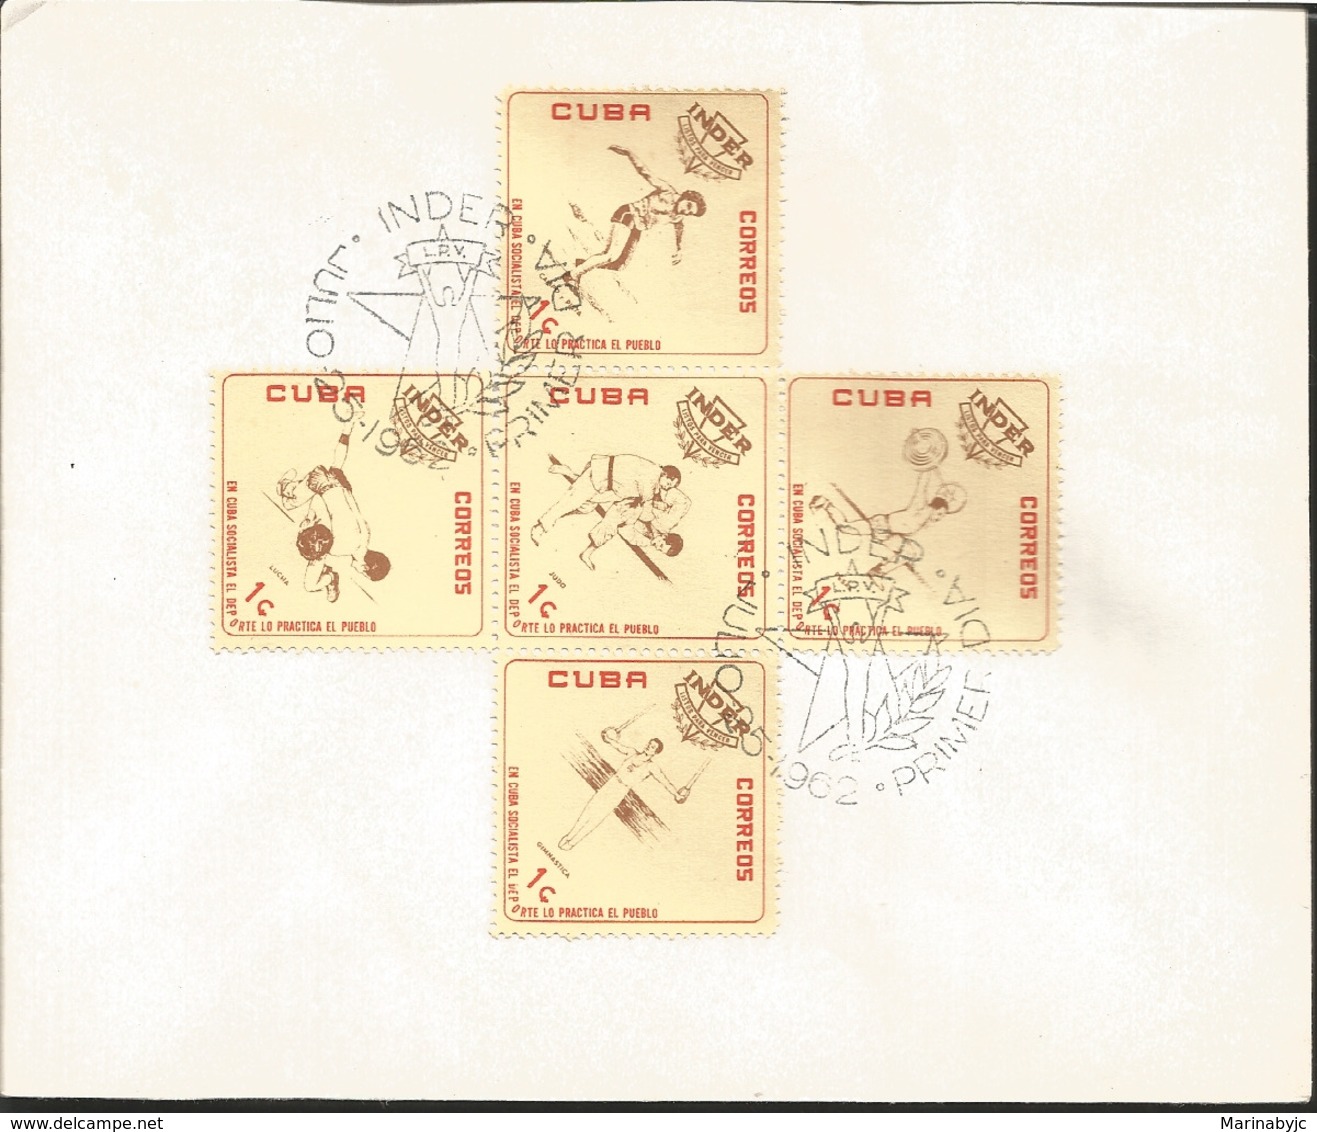 V) 1962 CARIBBEAN, SPORTS INSTITUTE, INDER, EMBLEM AND ATHLETES, BLACK CANCELLATION, WITH SLOGAN CANCELLATION, FDC - Covers & Documents